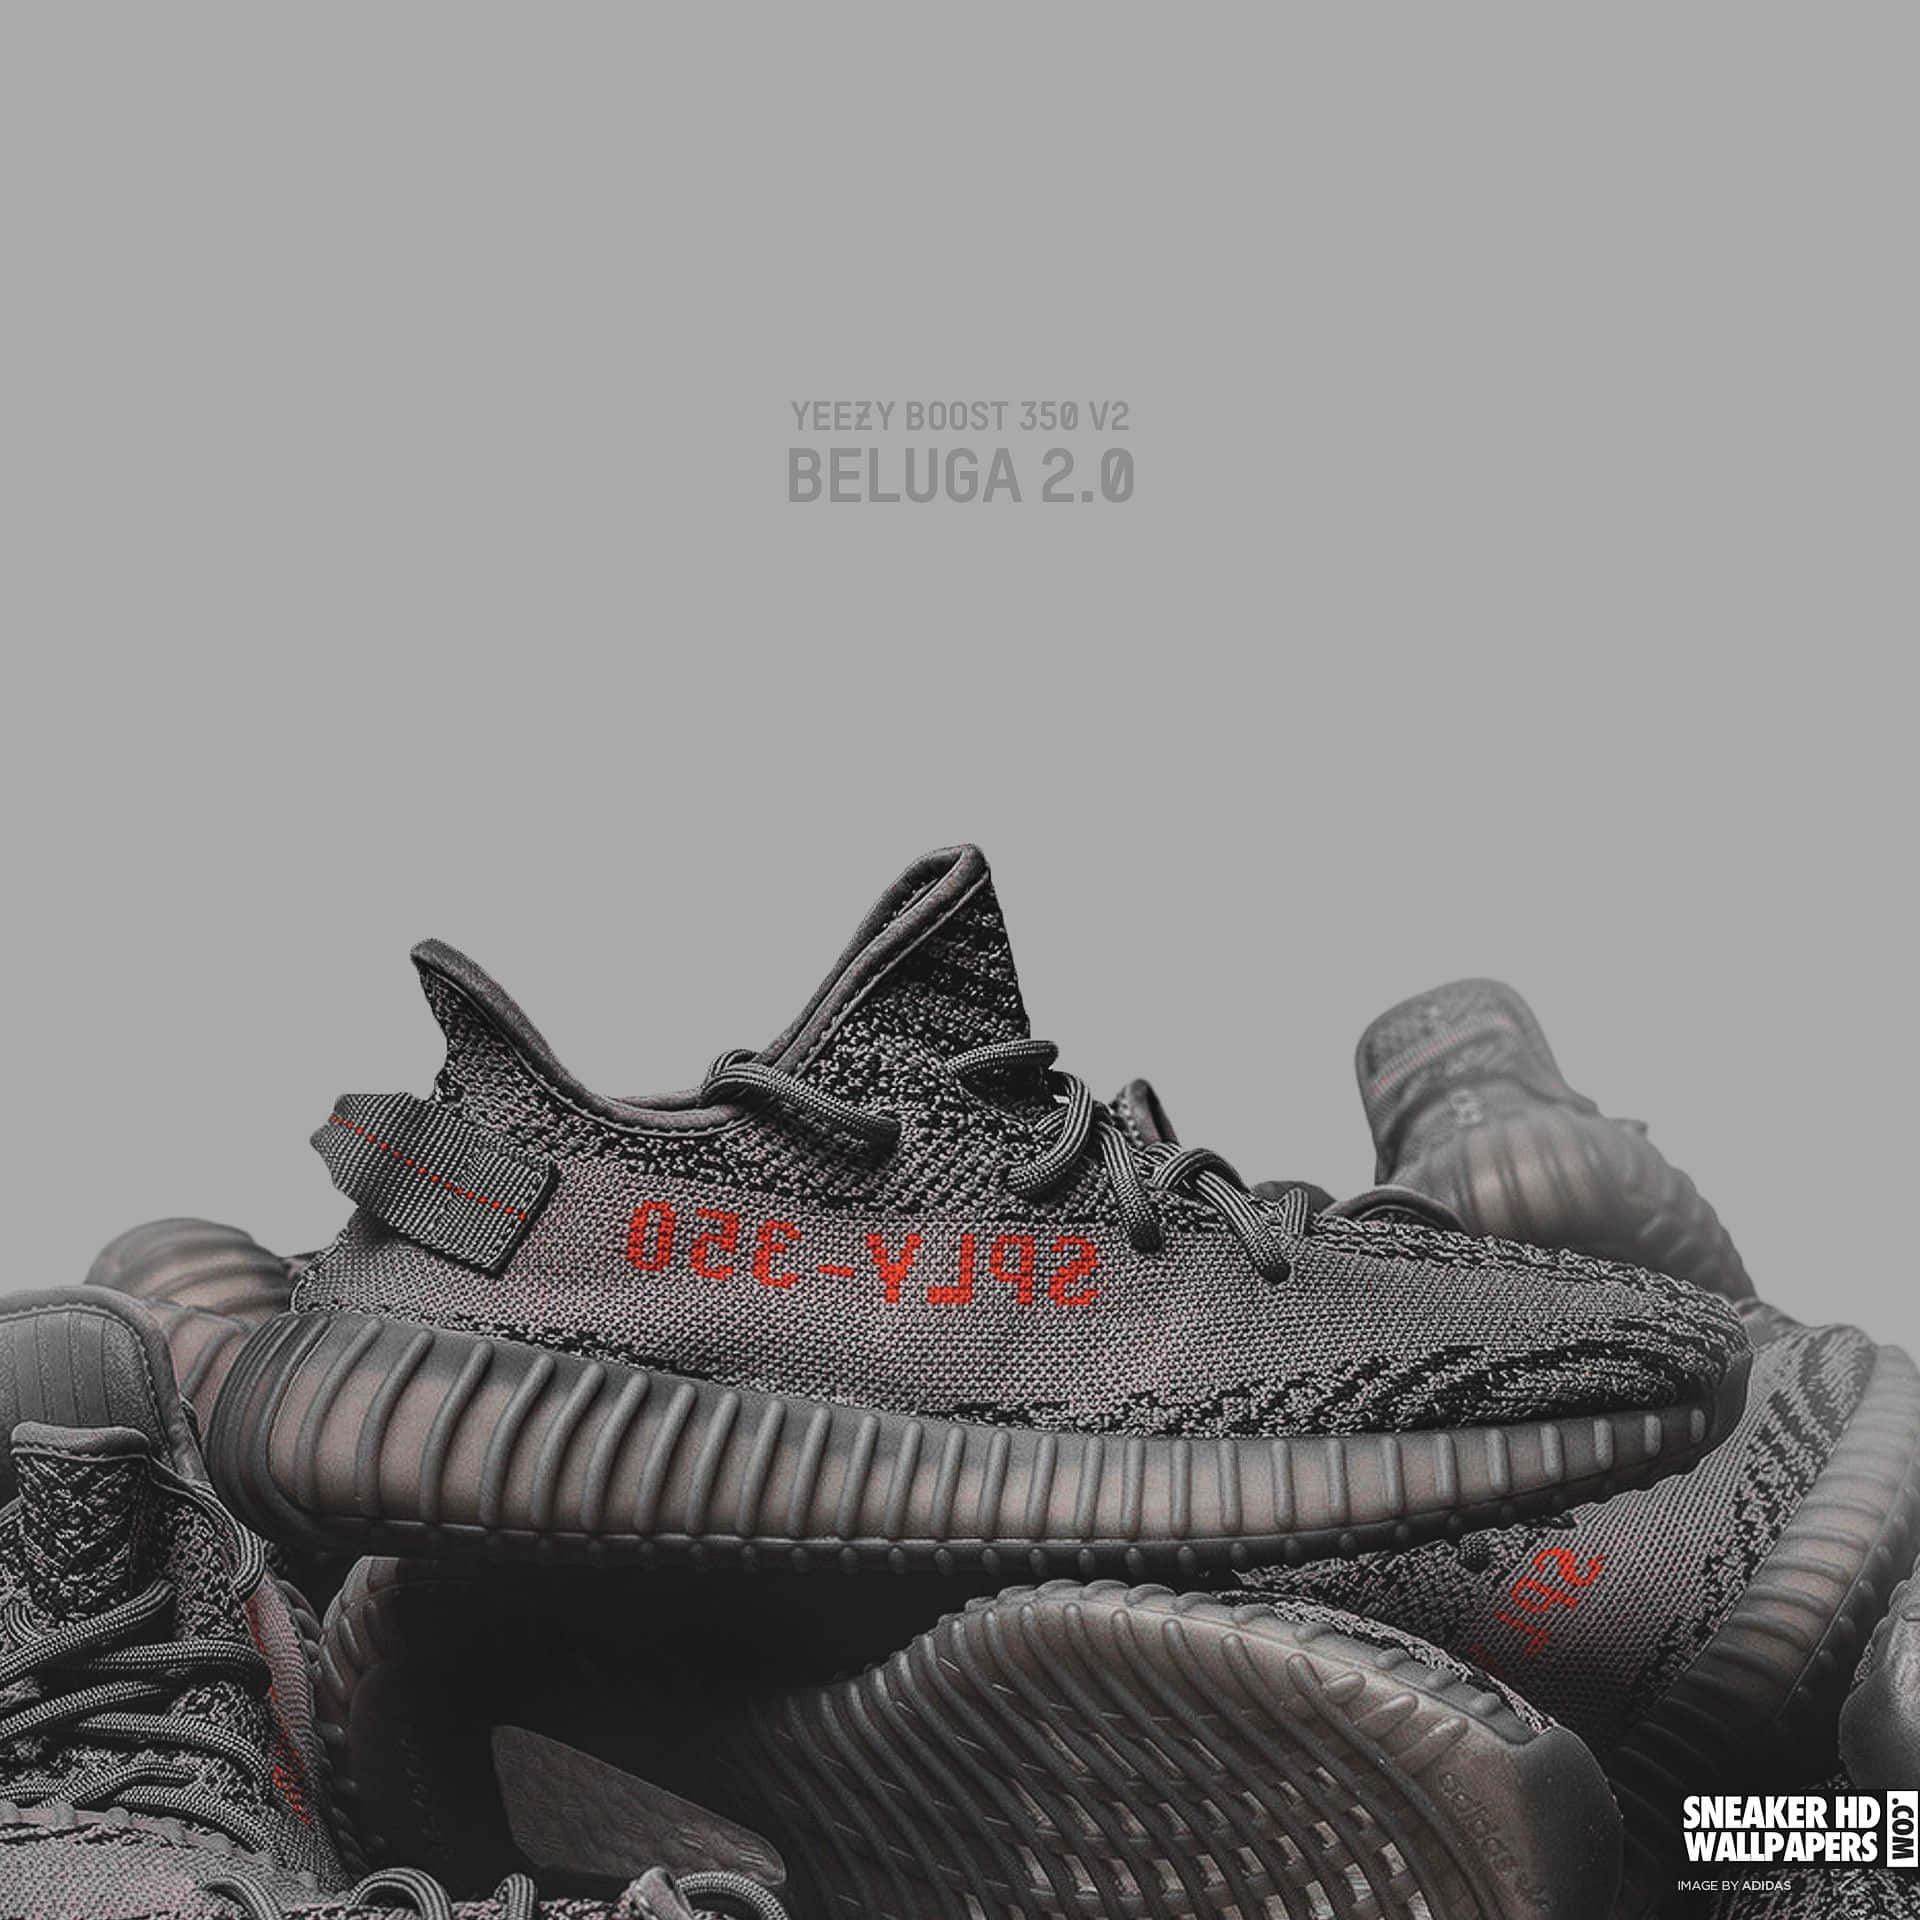 A Classic Look - Take your style to the next level with Yeezy Wallpaper